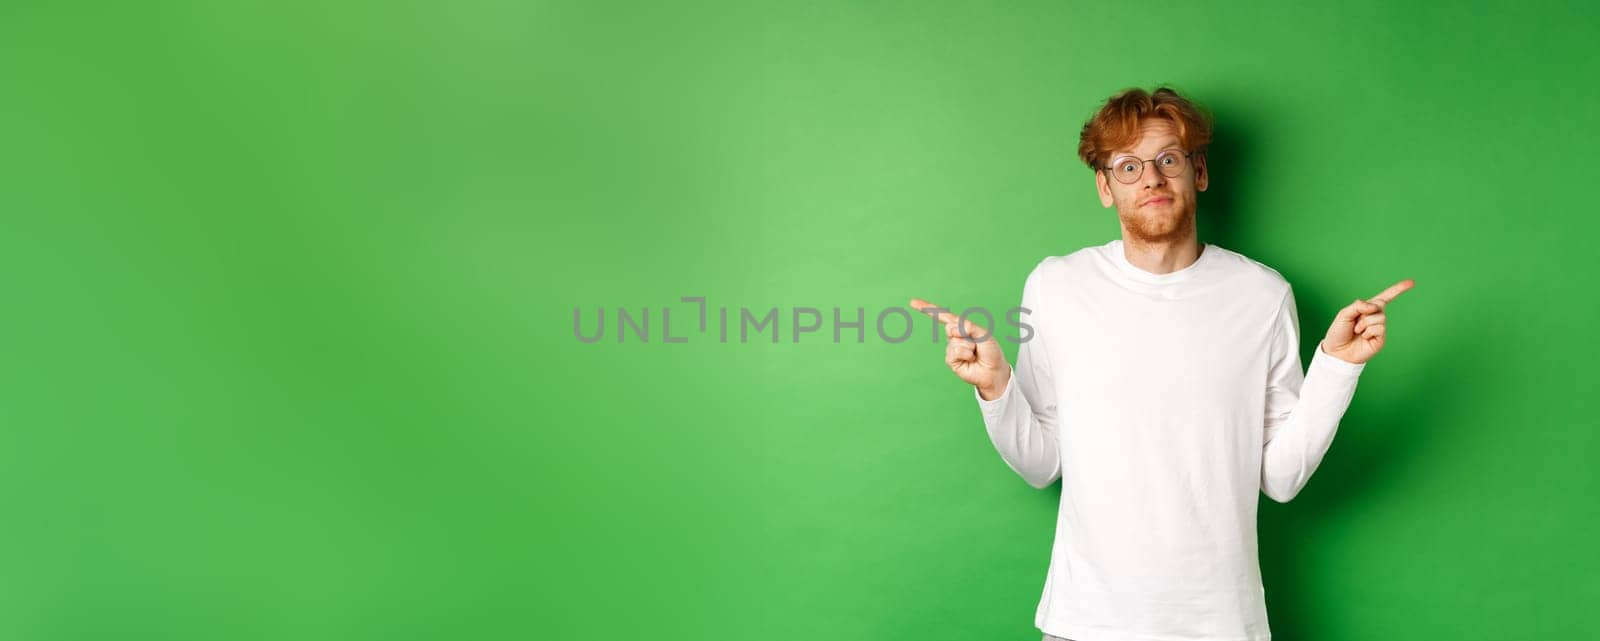 Indecisive funny guy with red hair pointing fingers sideways, staring confused at camera and showing two promo offers, standing over green background.